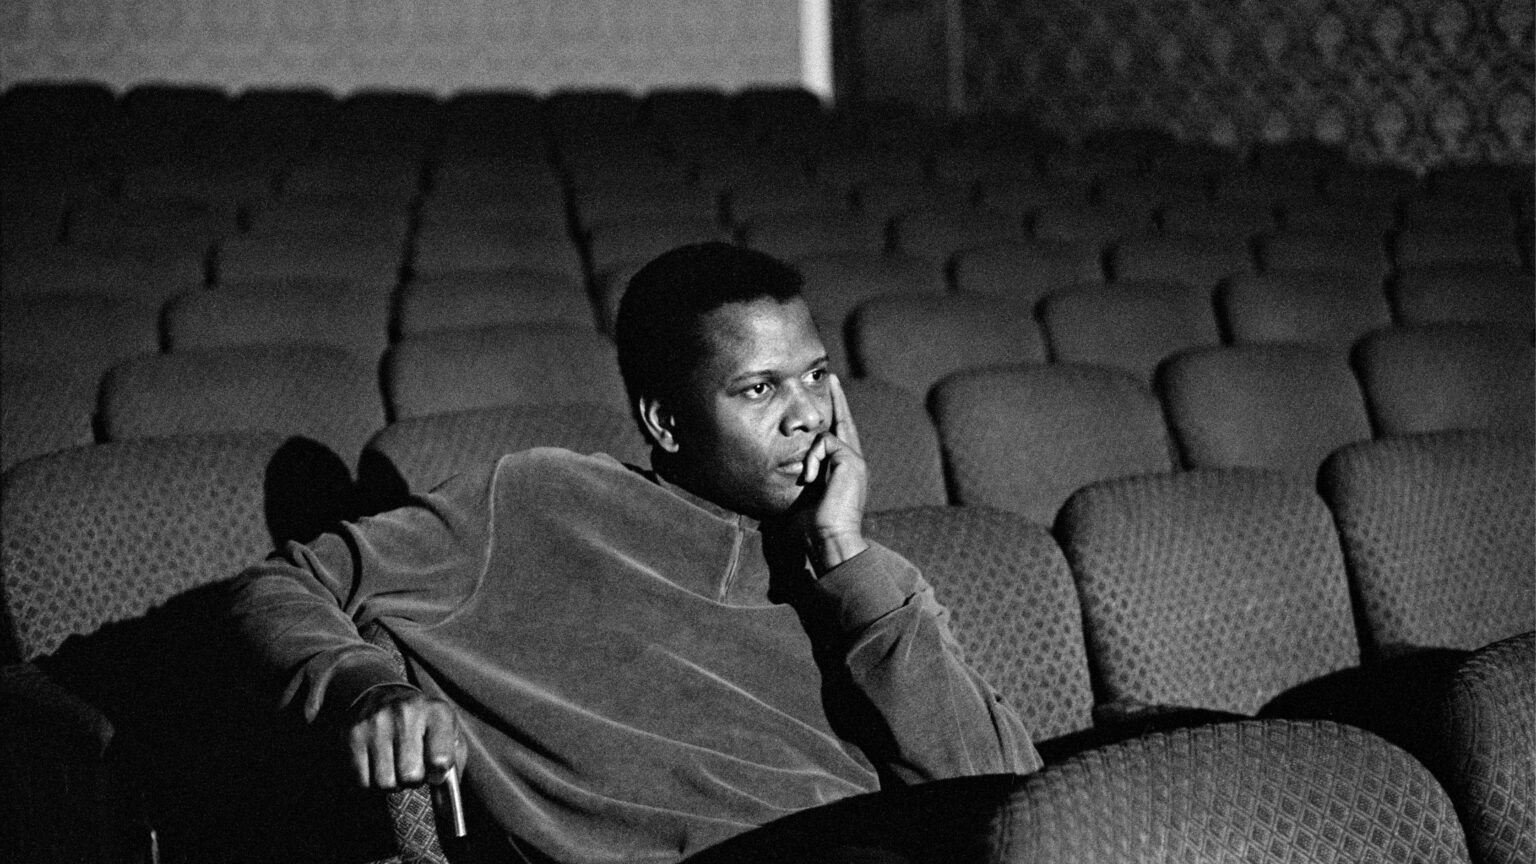 First Sidney trailer explores Poitier’s powerful legacy